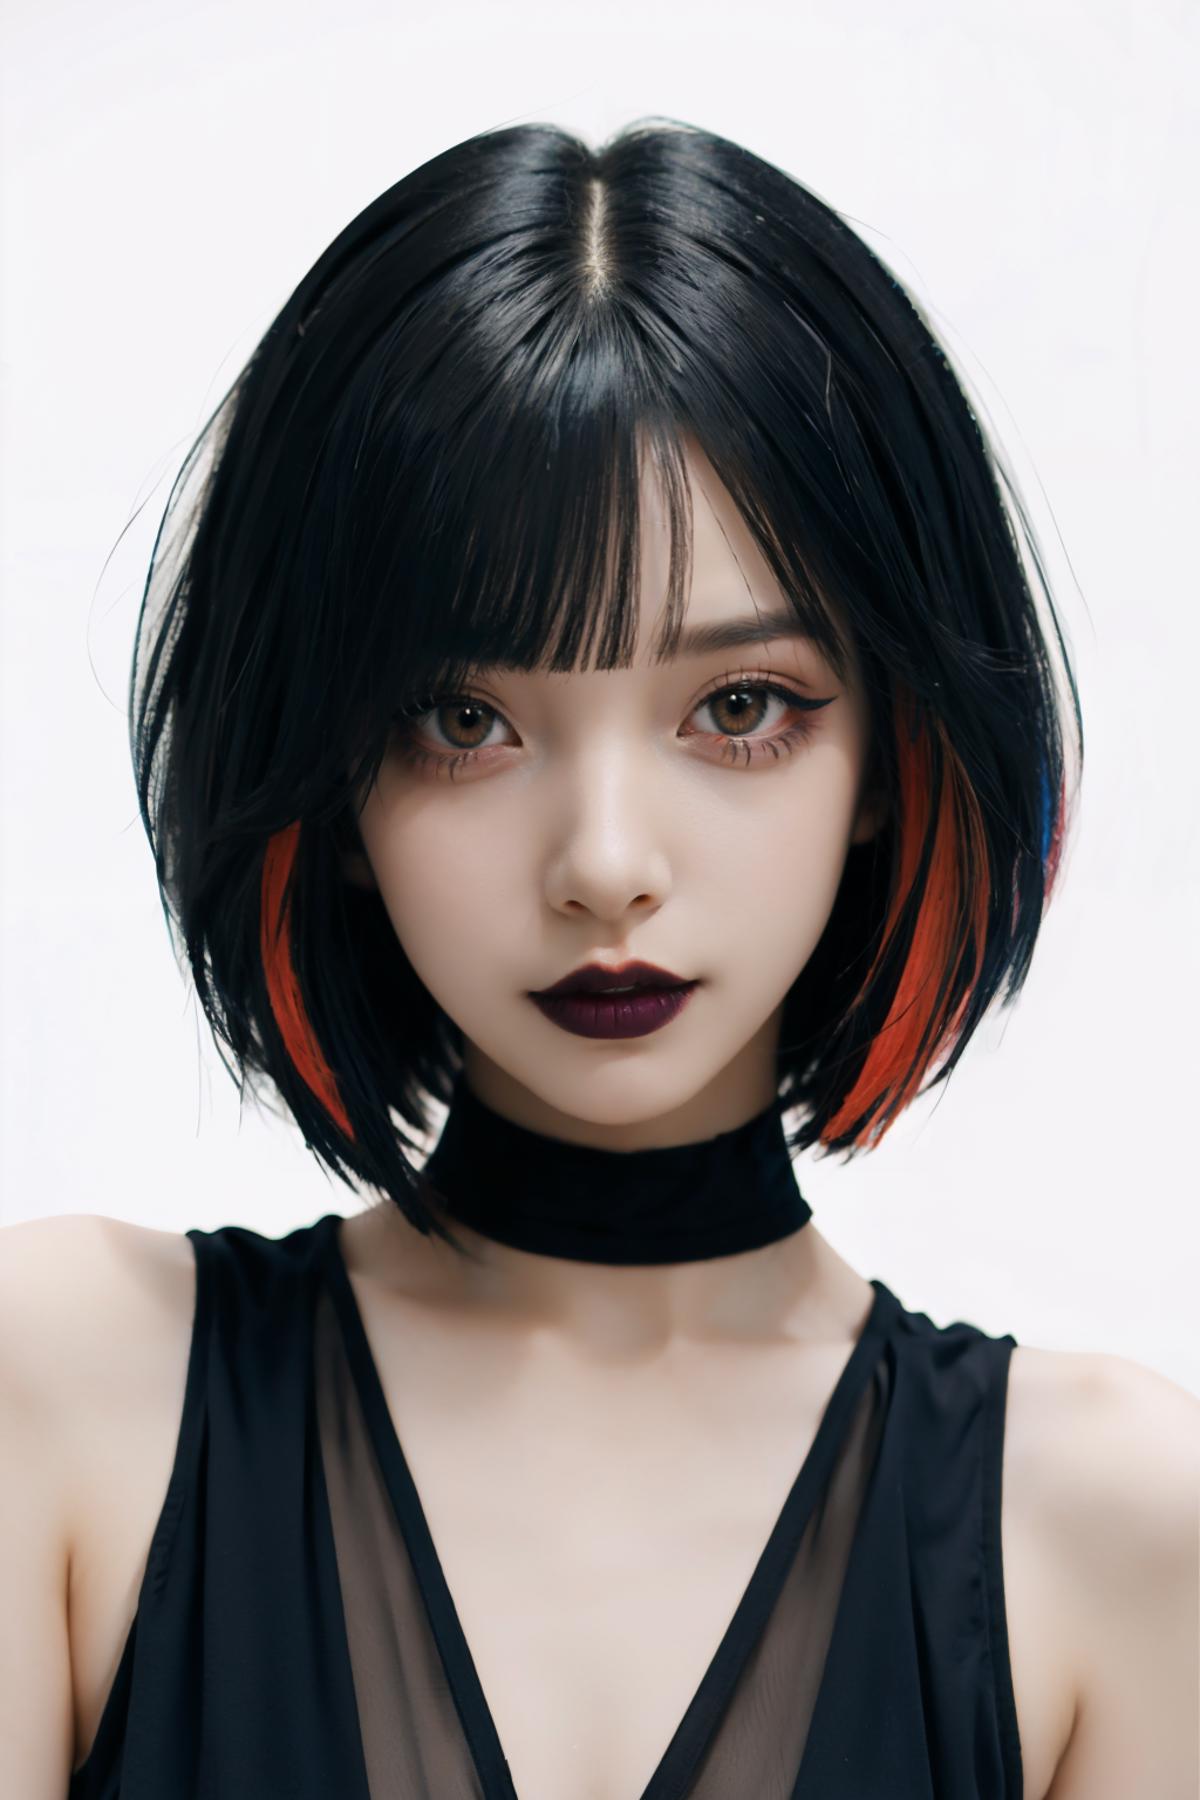 A woman with short black hair, a black choker, and red highlights.